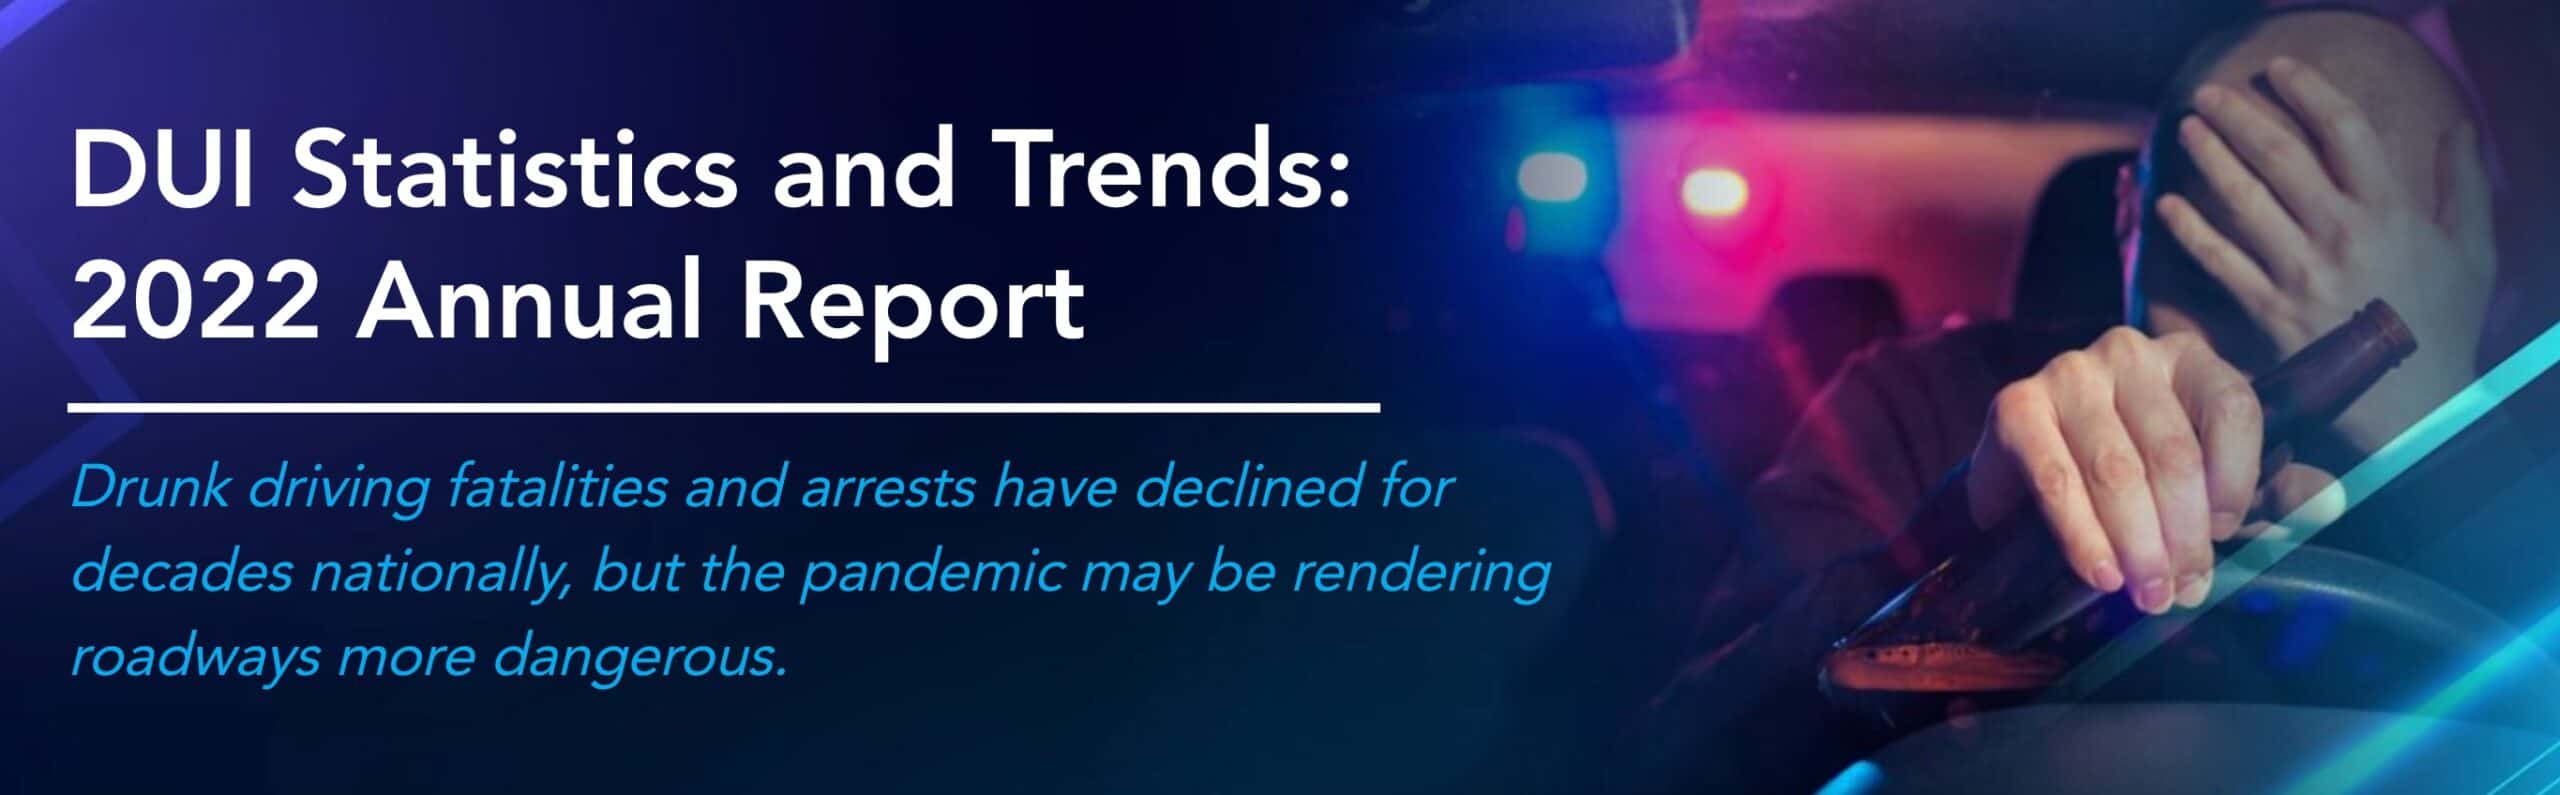 DUI Statistics and Trends: 2022 Annual Report Featured Image